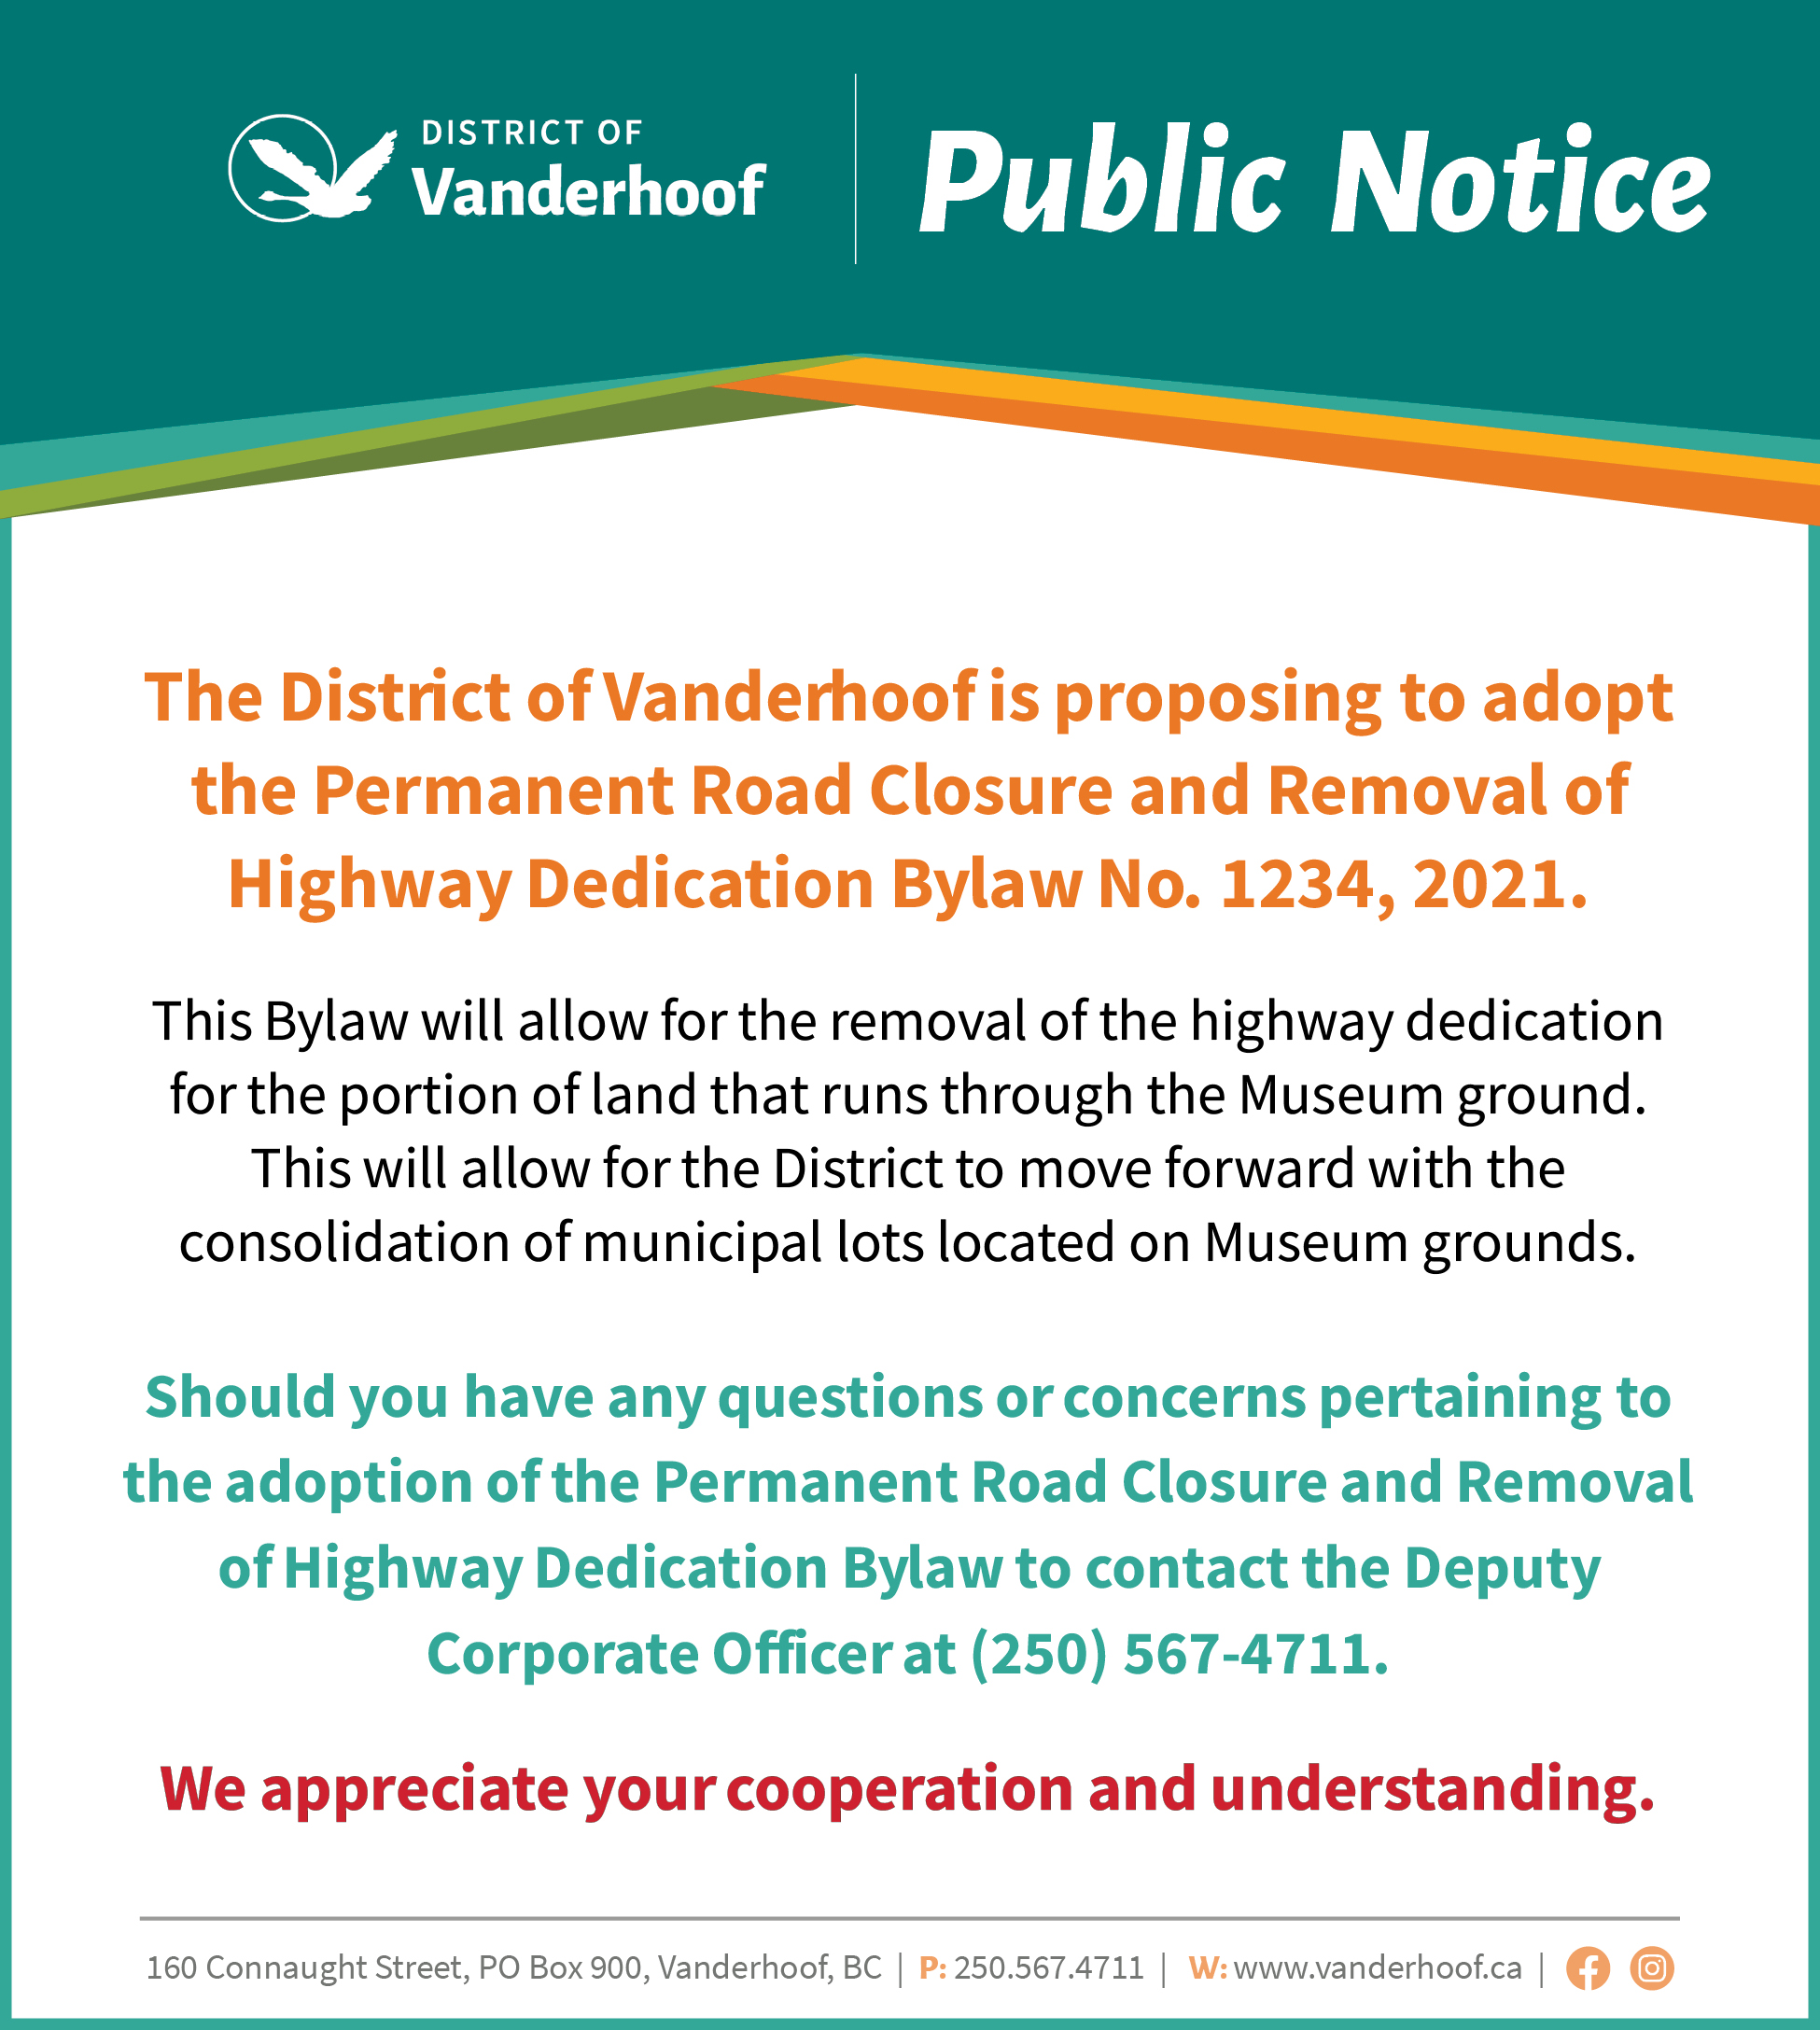 The District of Vanderhoof is proposing to adopt the Permanent Road Closure and Removal of Highway Dedication Bylaw No. 1234, 2021. This Bylaw will allow for the removal of the highway dedication for the portion of land that runs through the Museum ground. This will allow for the District to move forward with the consolidation of municipal lots located on Museum grounds.   Should you have any questions or concerns pertaining to the adoption of the Permanent Road Closure and Removal of Highway Dedication Bylaw to contact the Deputy Corporate Officer at (250) 567-4711.